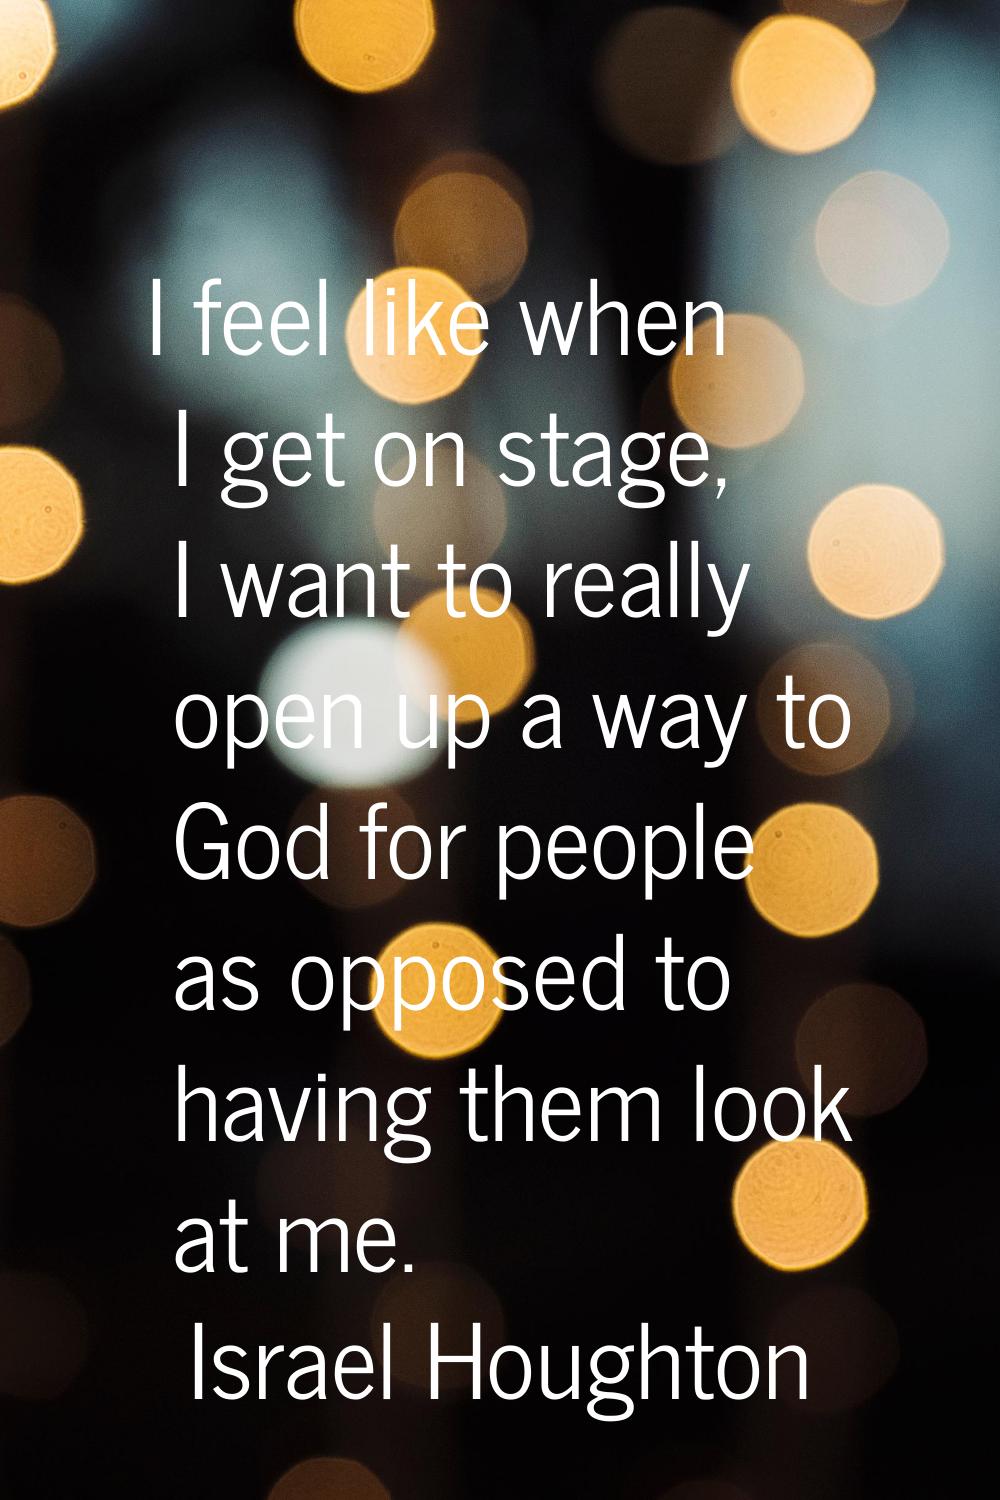 I feel like when I get on stage, I want to really open up a way to God for people as opposed to hav